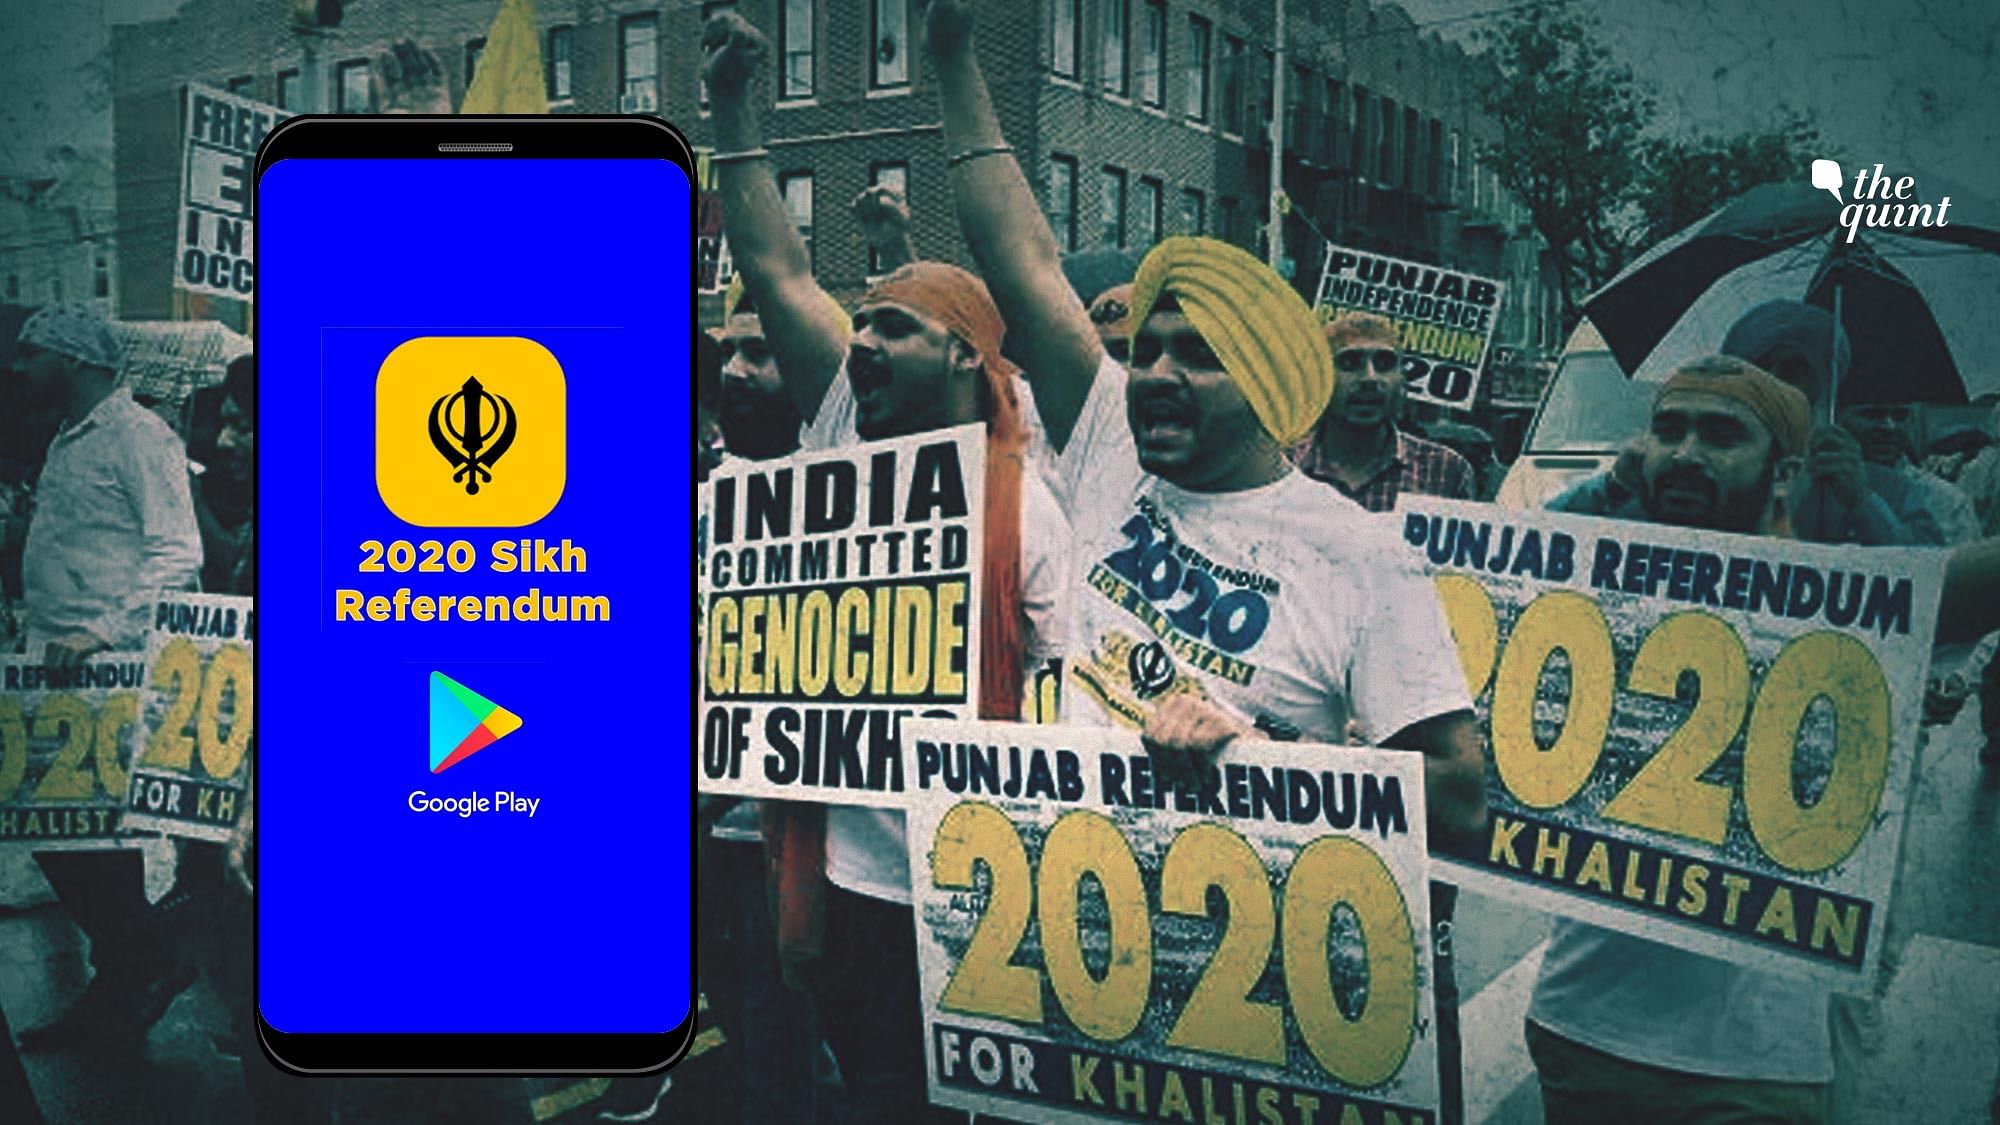 A secessionist app called ‘Referendum 2020’, which sought to “liberate Punjab” popped up on Google Playstore on Friday, 8 November.